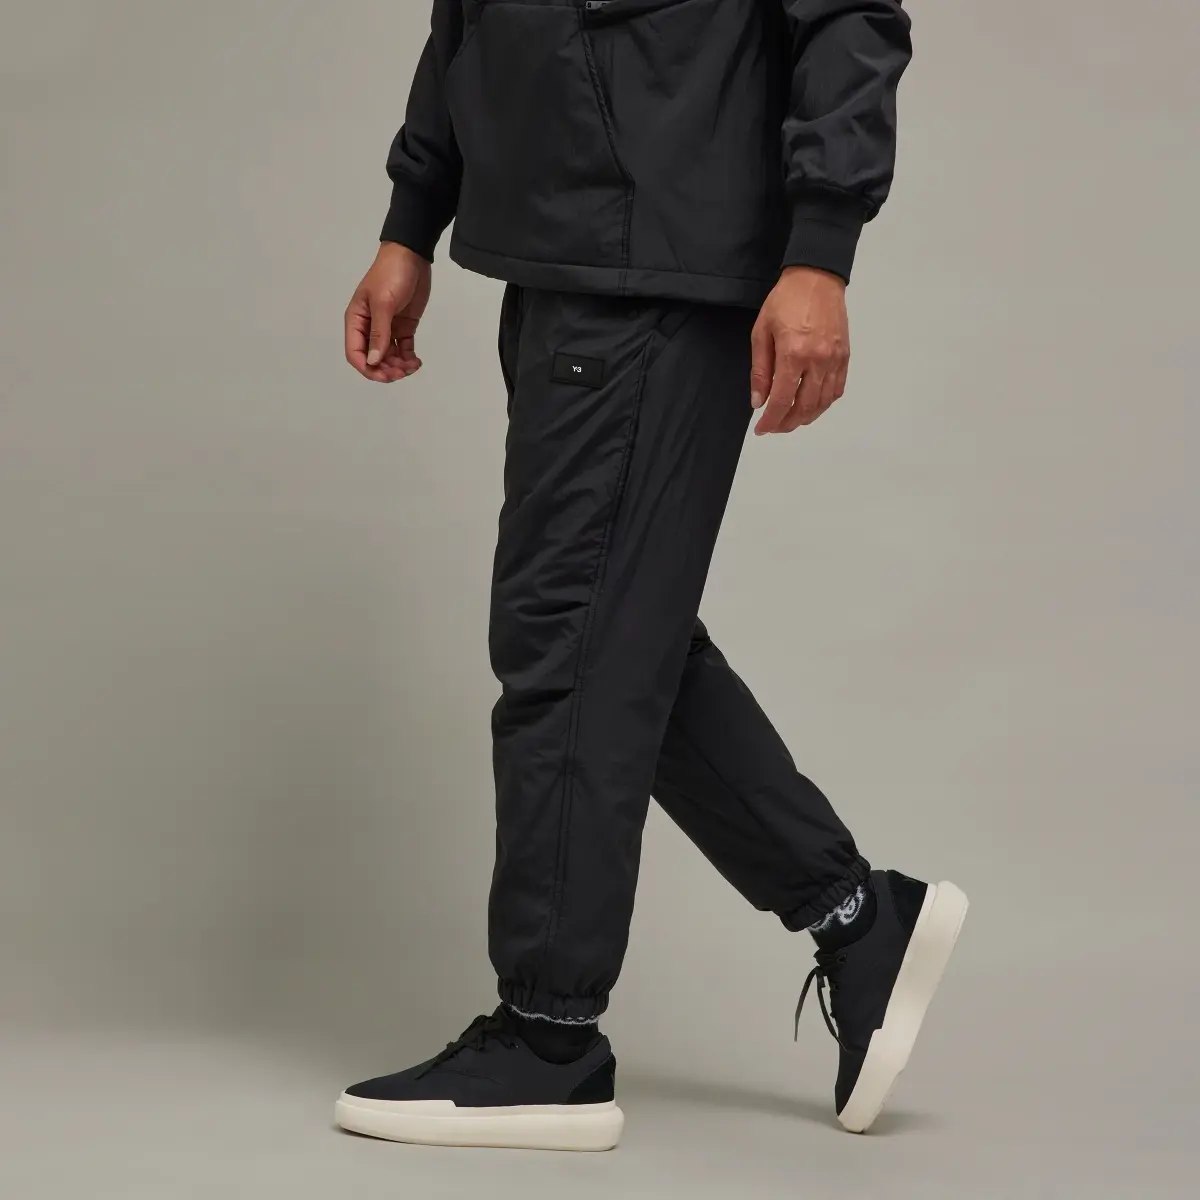 Adidas Y-3 Padded Tracksuit Bottoms. 2